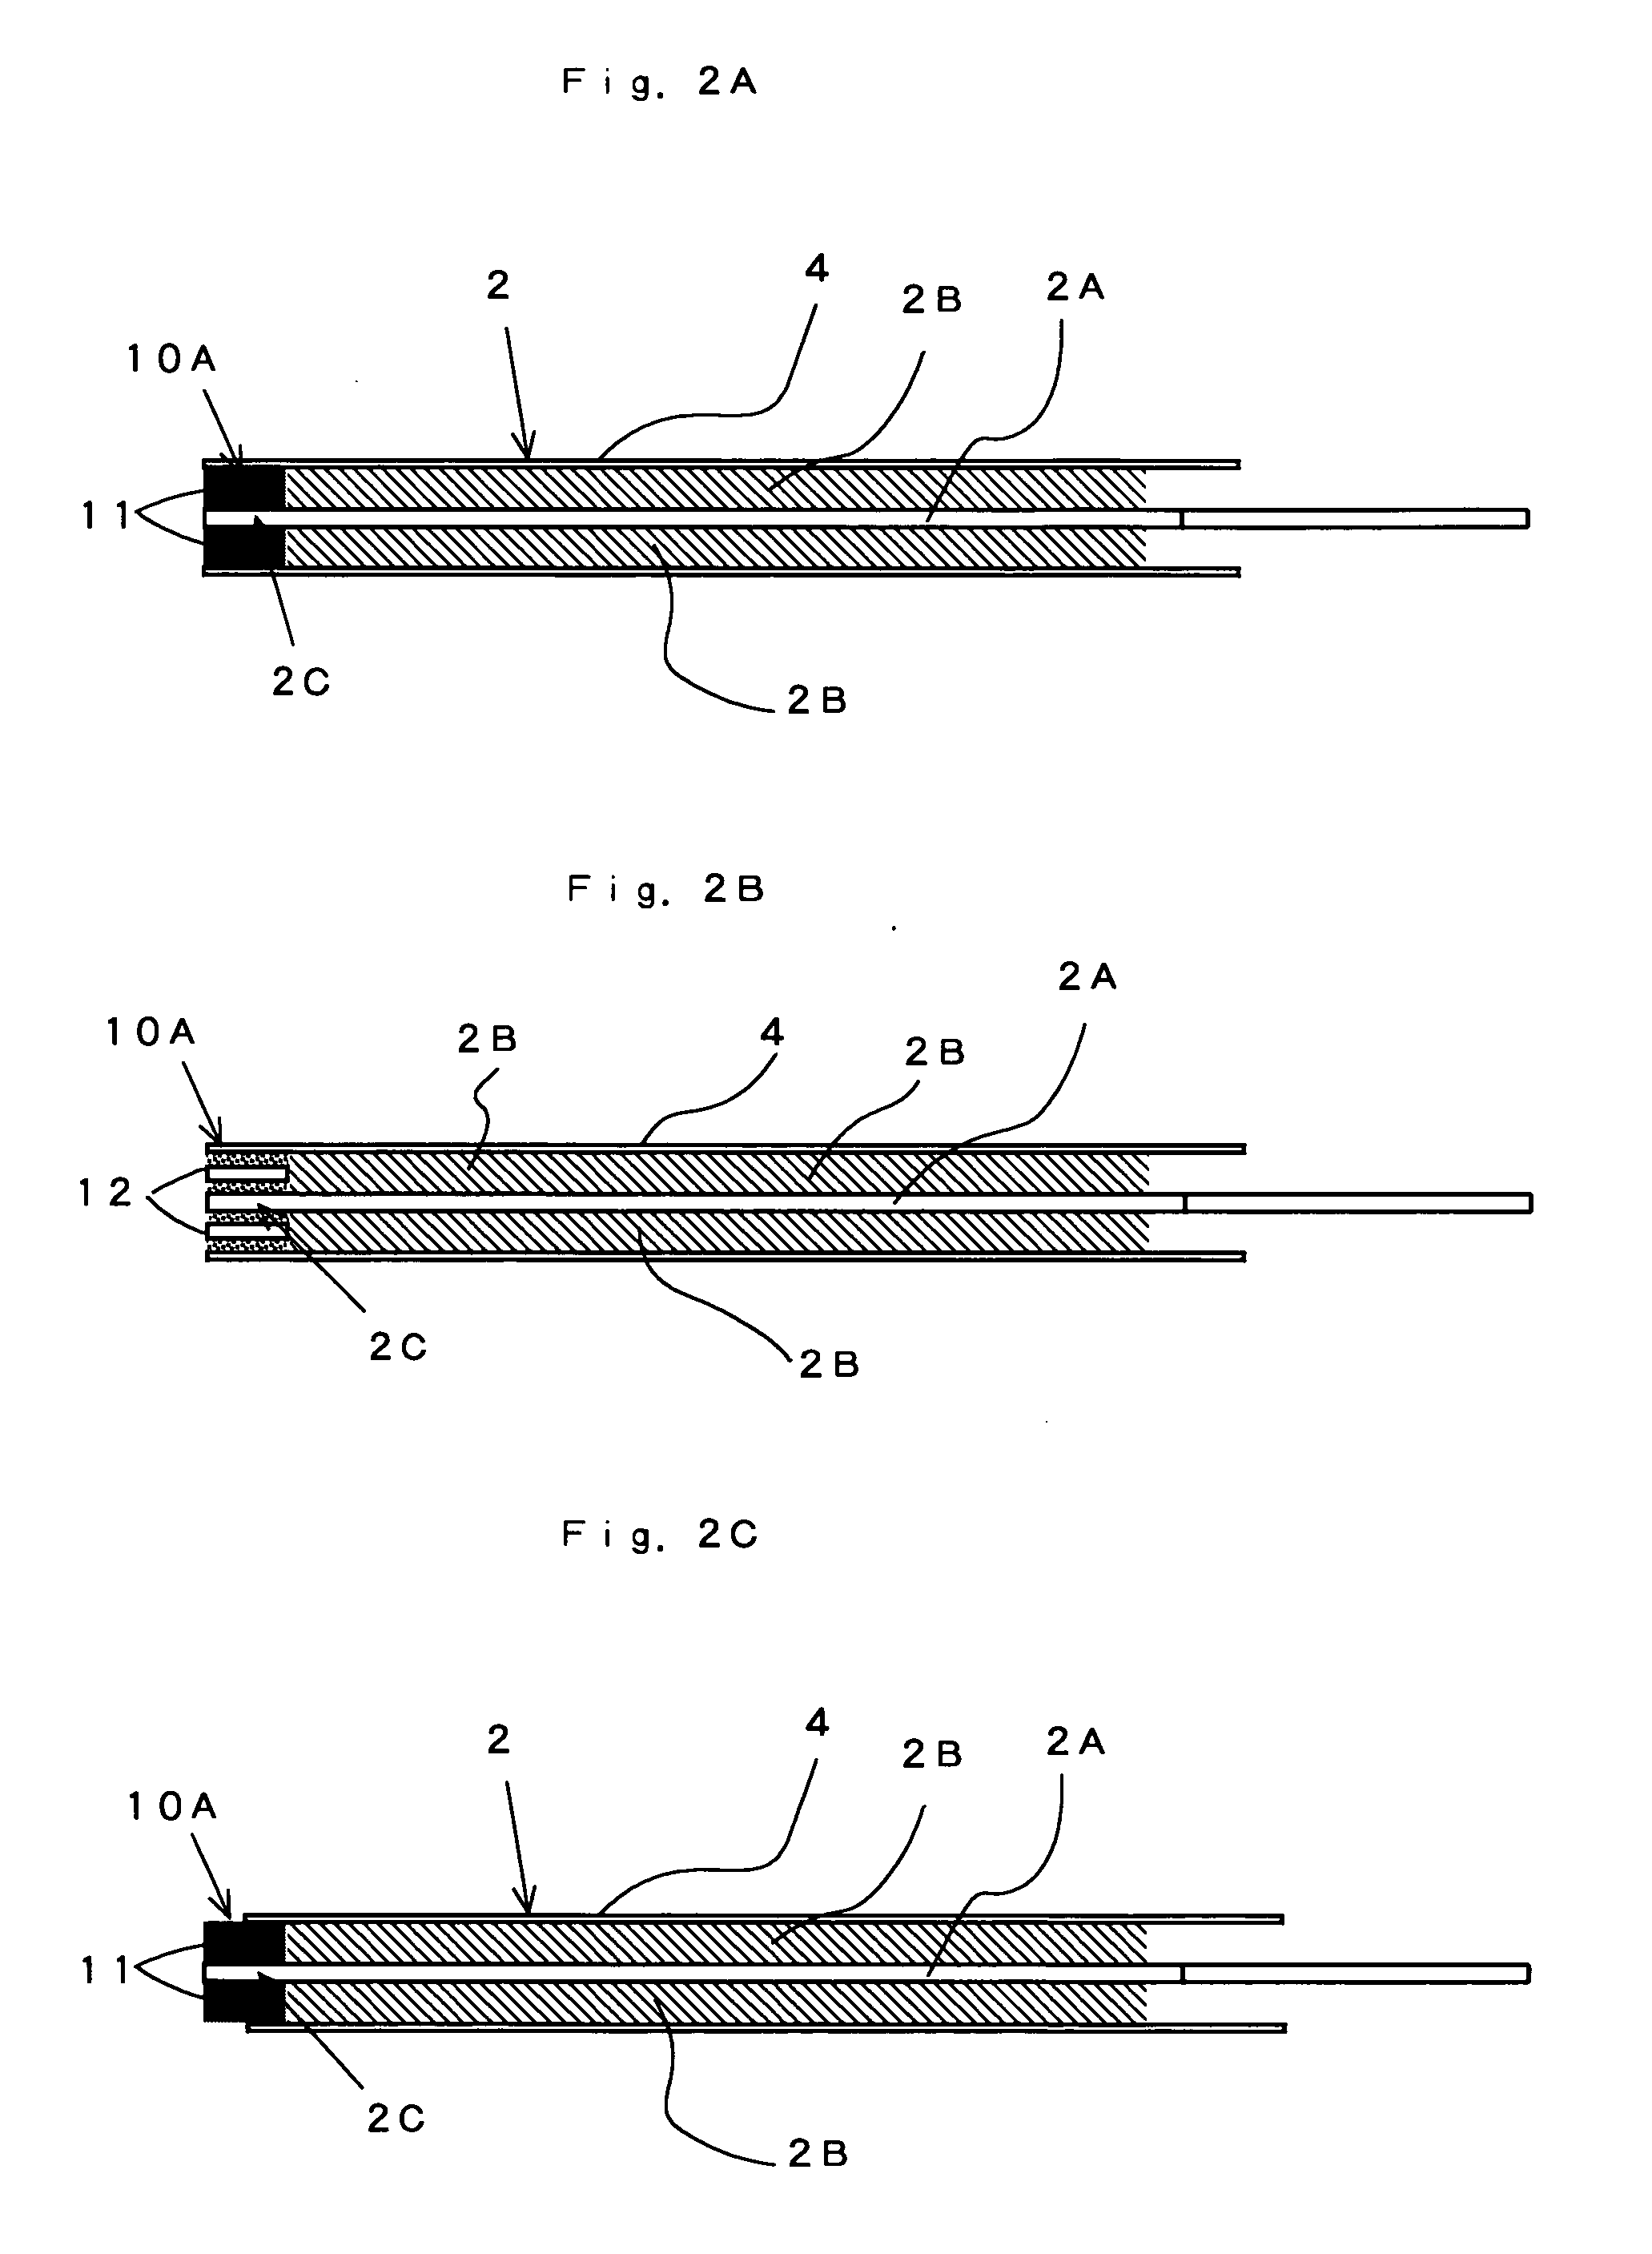 Multilayer secondary battery and method of making same